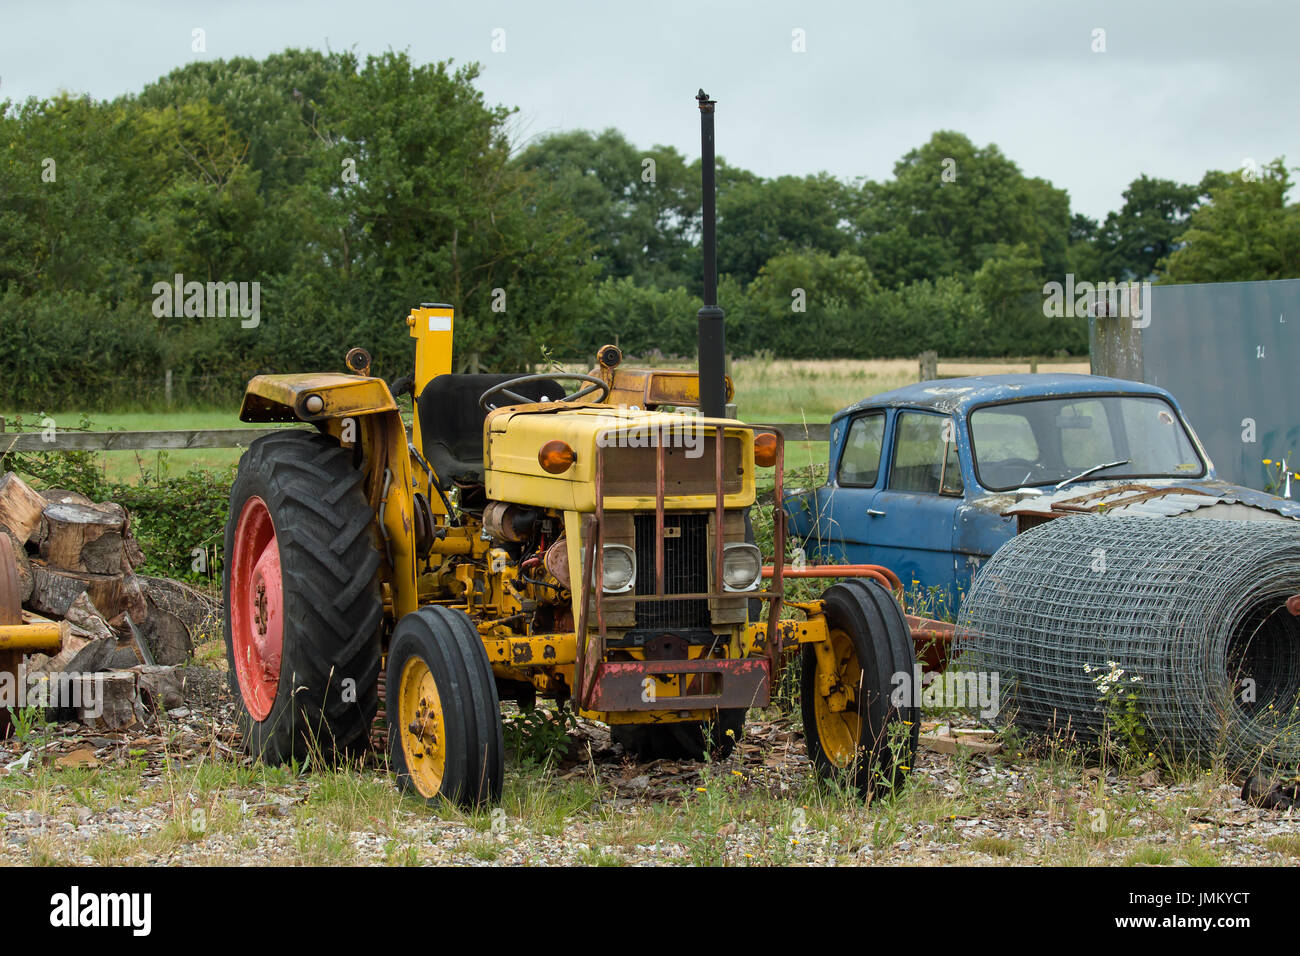 Old, rusting, yellow tractor on waste ground. Stock Photo